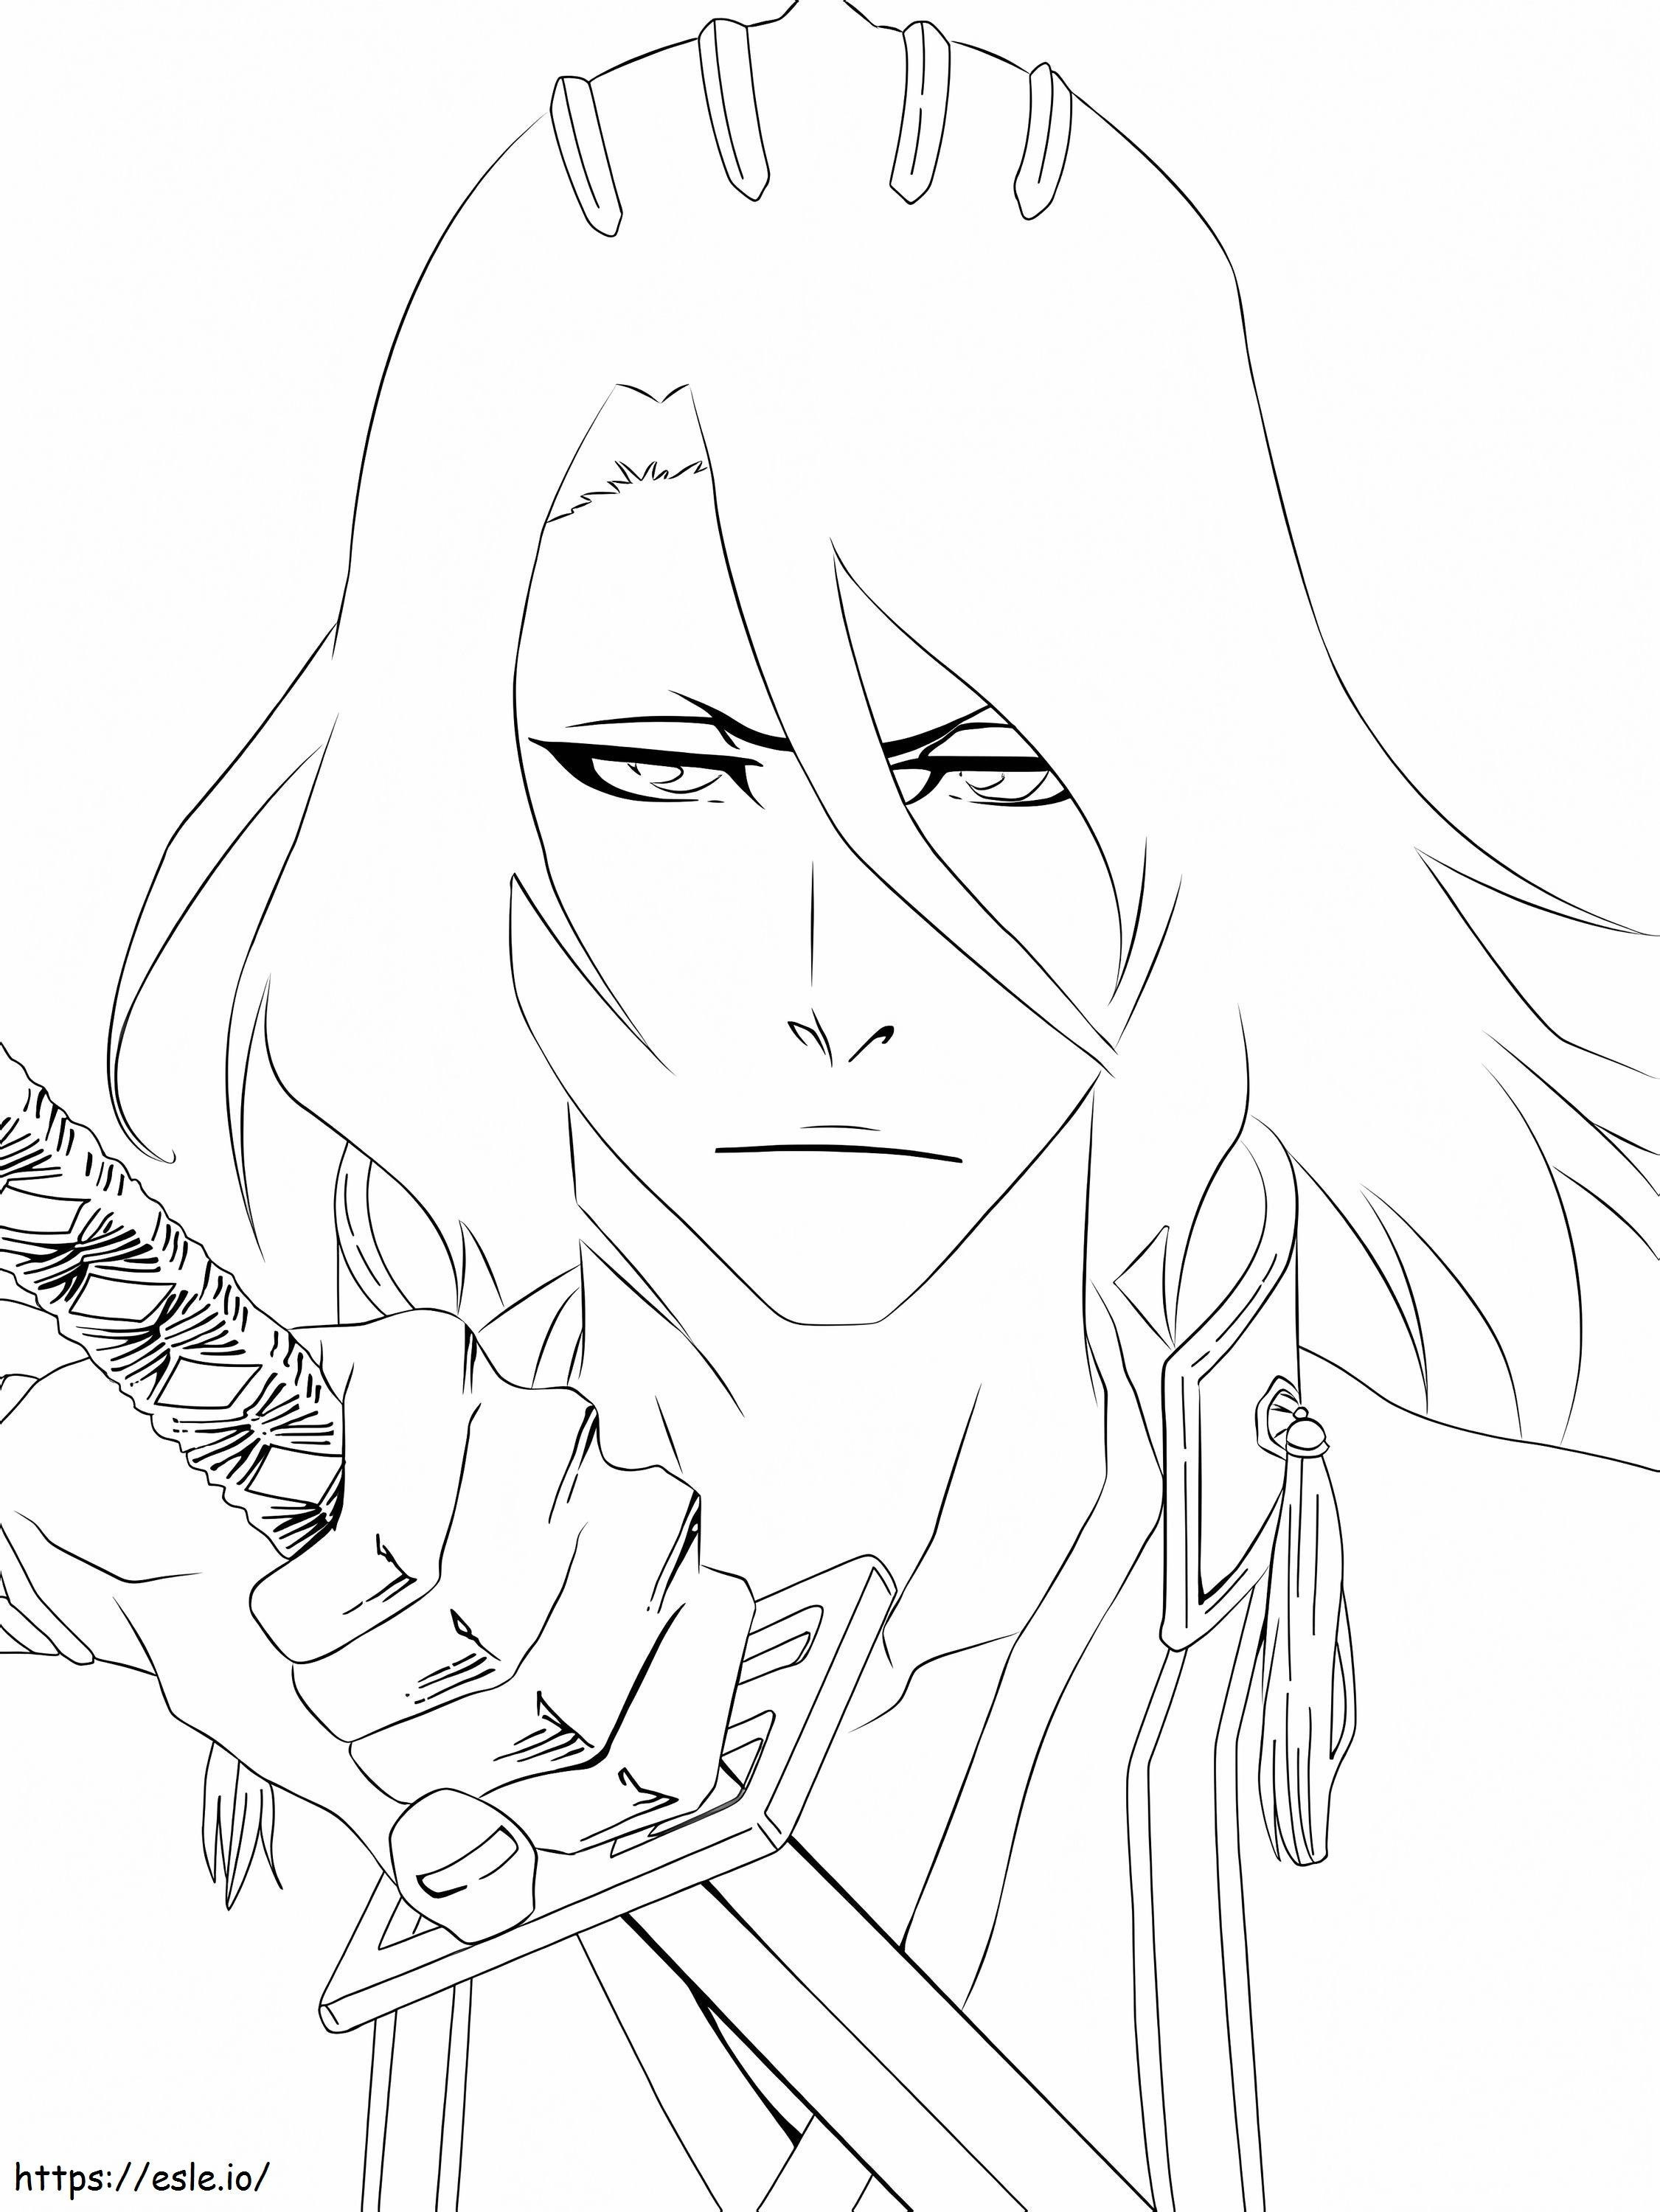 Byakuya From Bleach coloring page